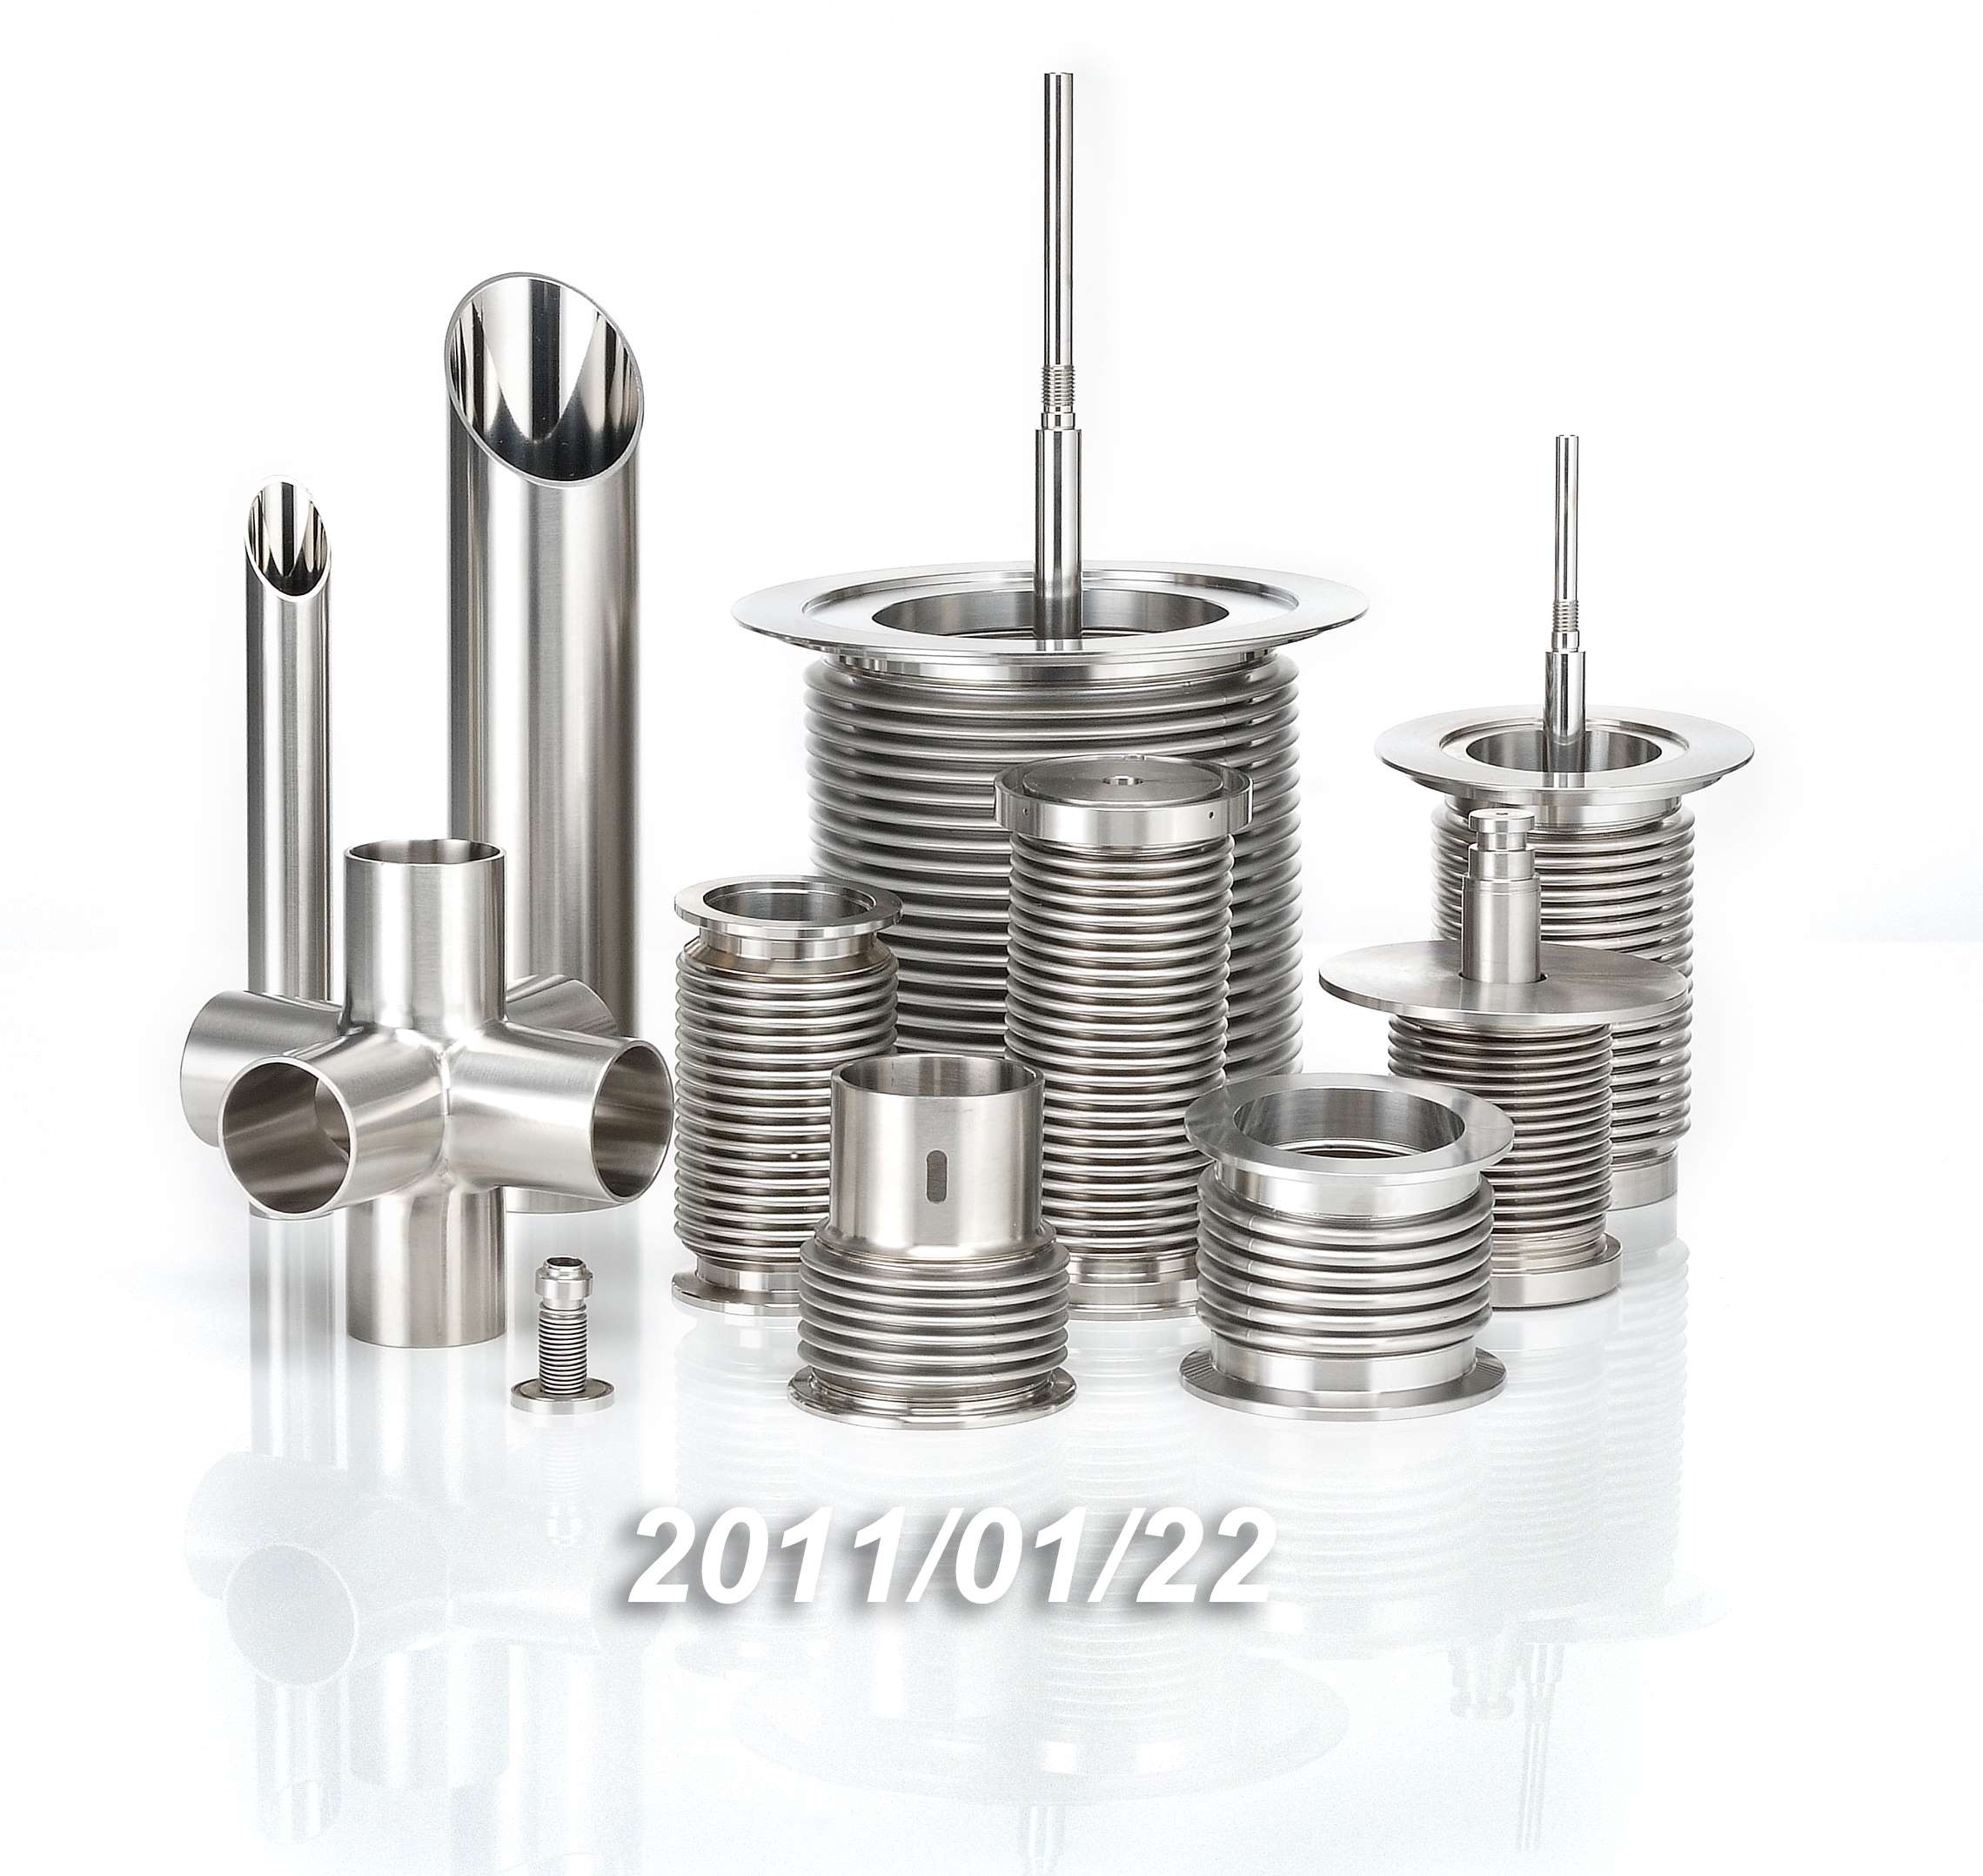 Qualified Hose Clamp Screws Manufacturer and Supplier